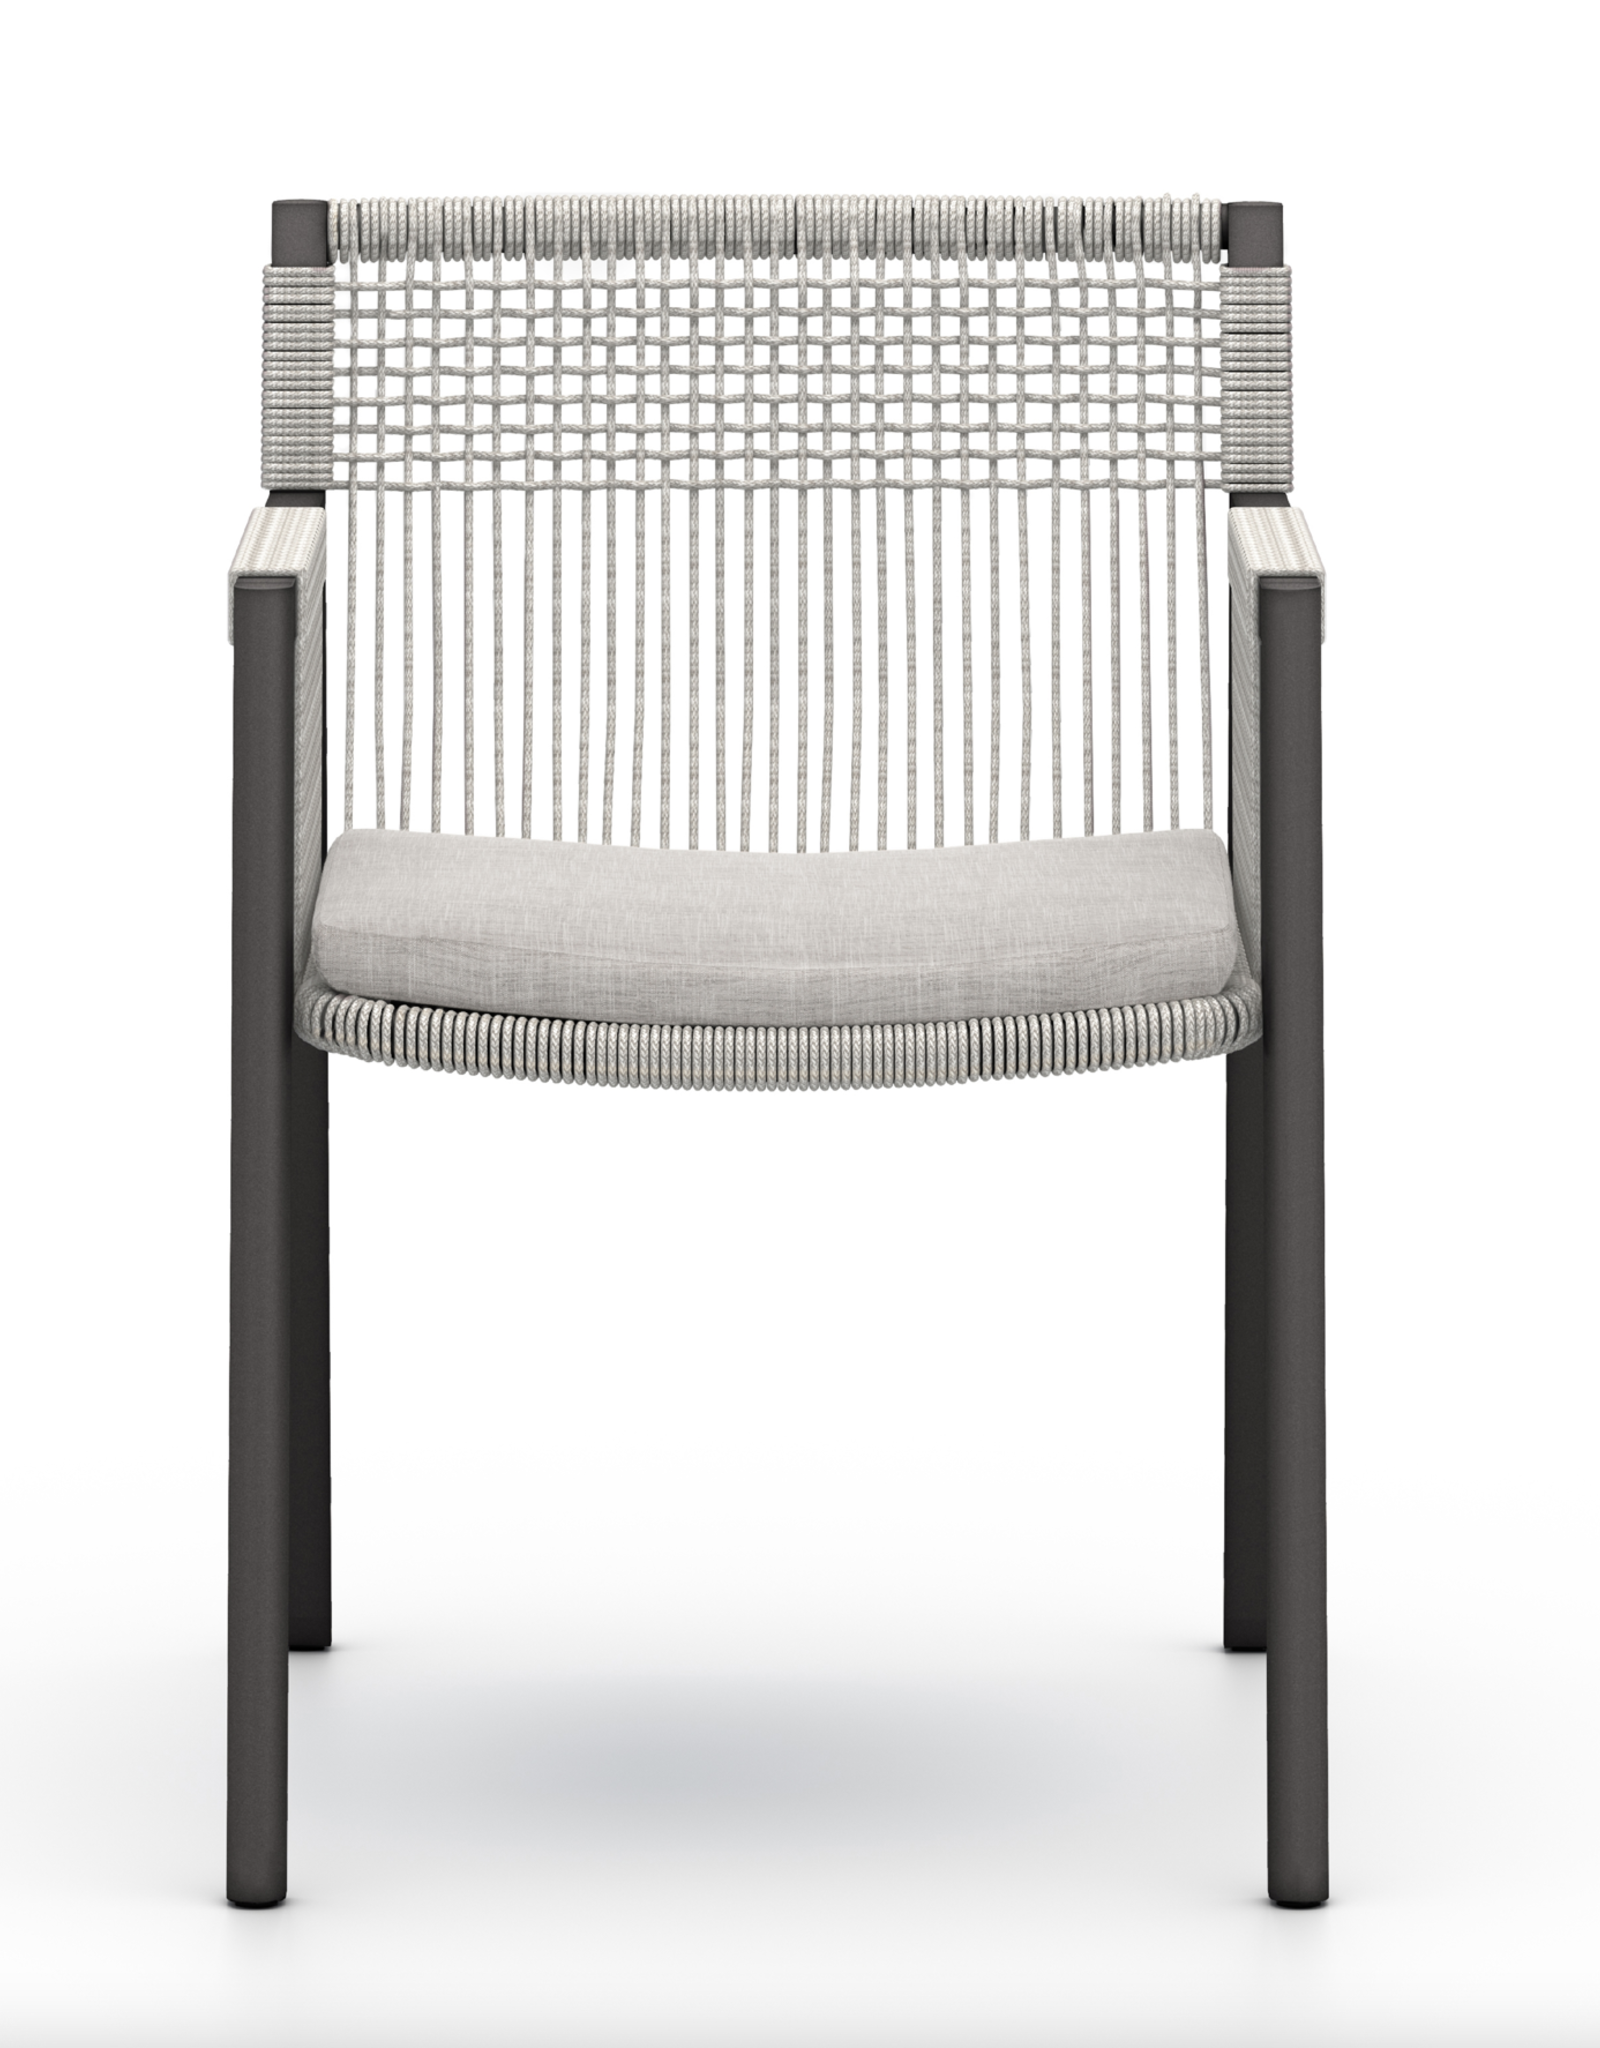 Shuman Outdoor Dining Chair in Stone Grey